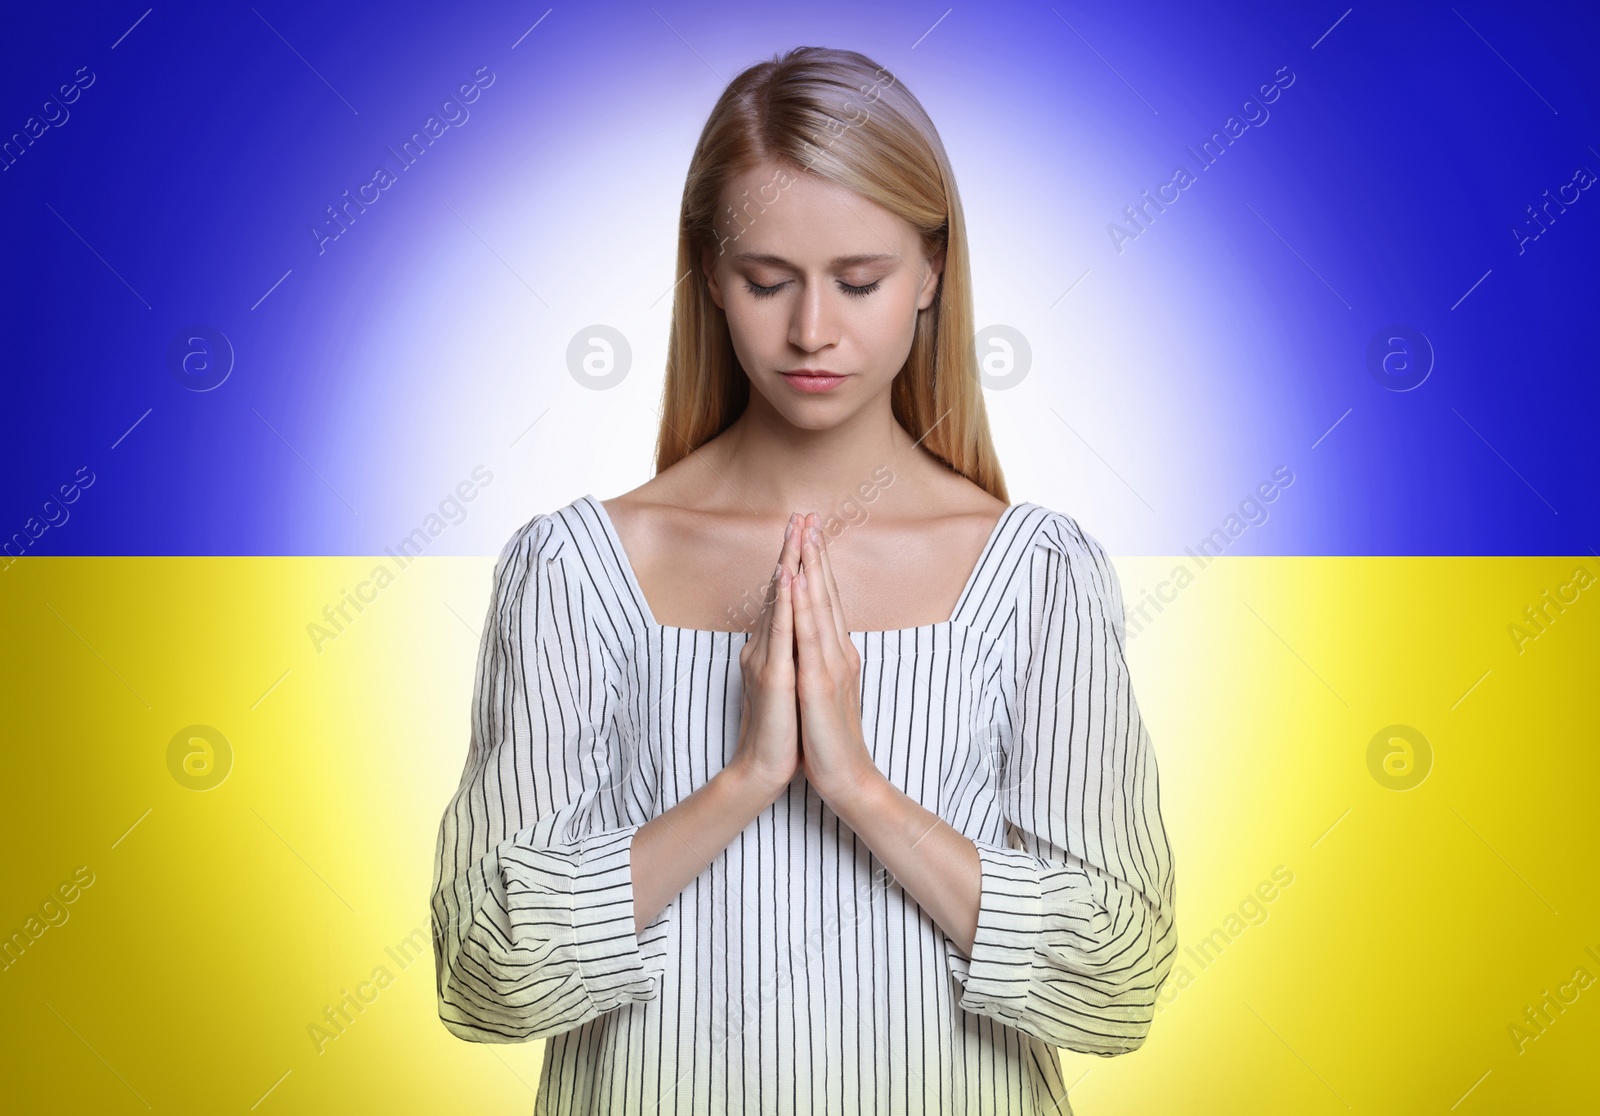 Image of Pray for Ukraine. Young woman with clasped hands praying against Ukrainian national flag